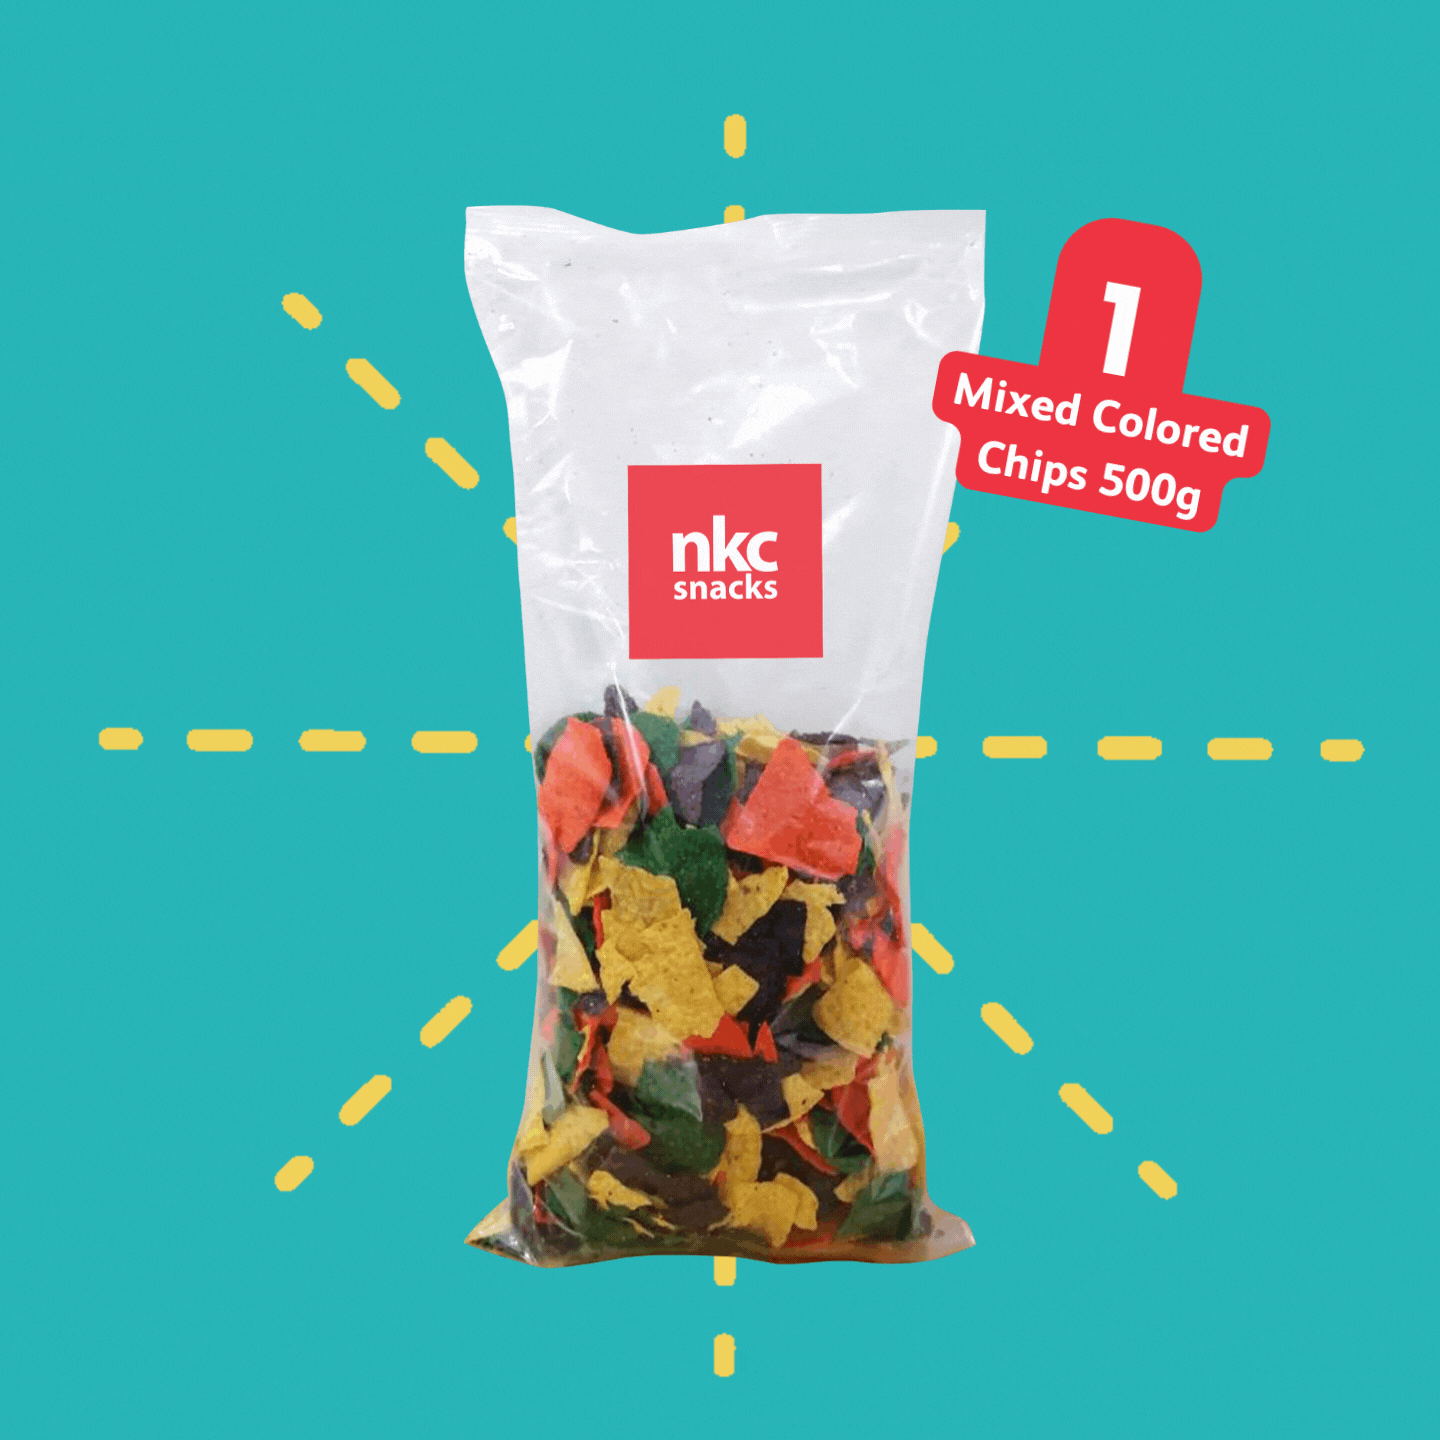 Mixed Colored Chips 500g